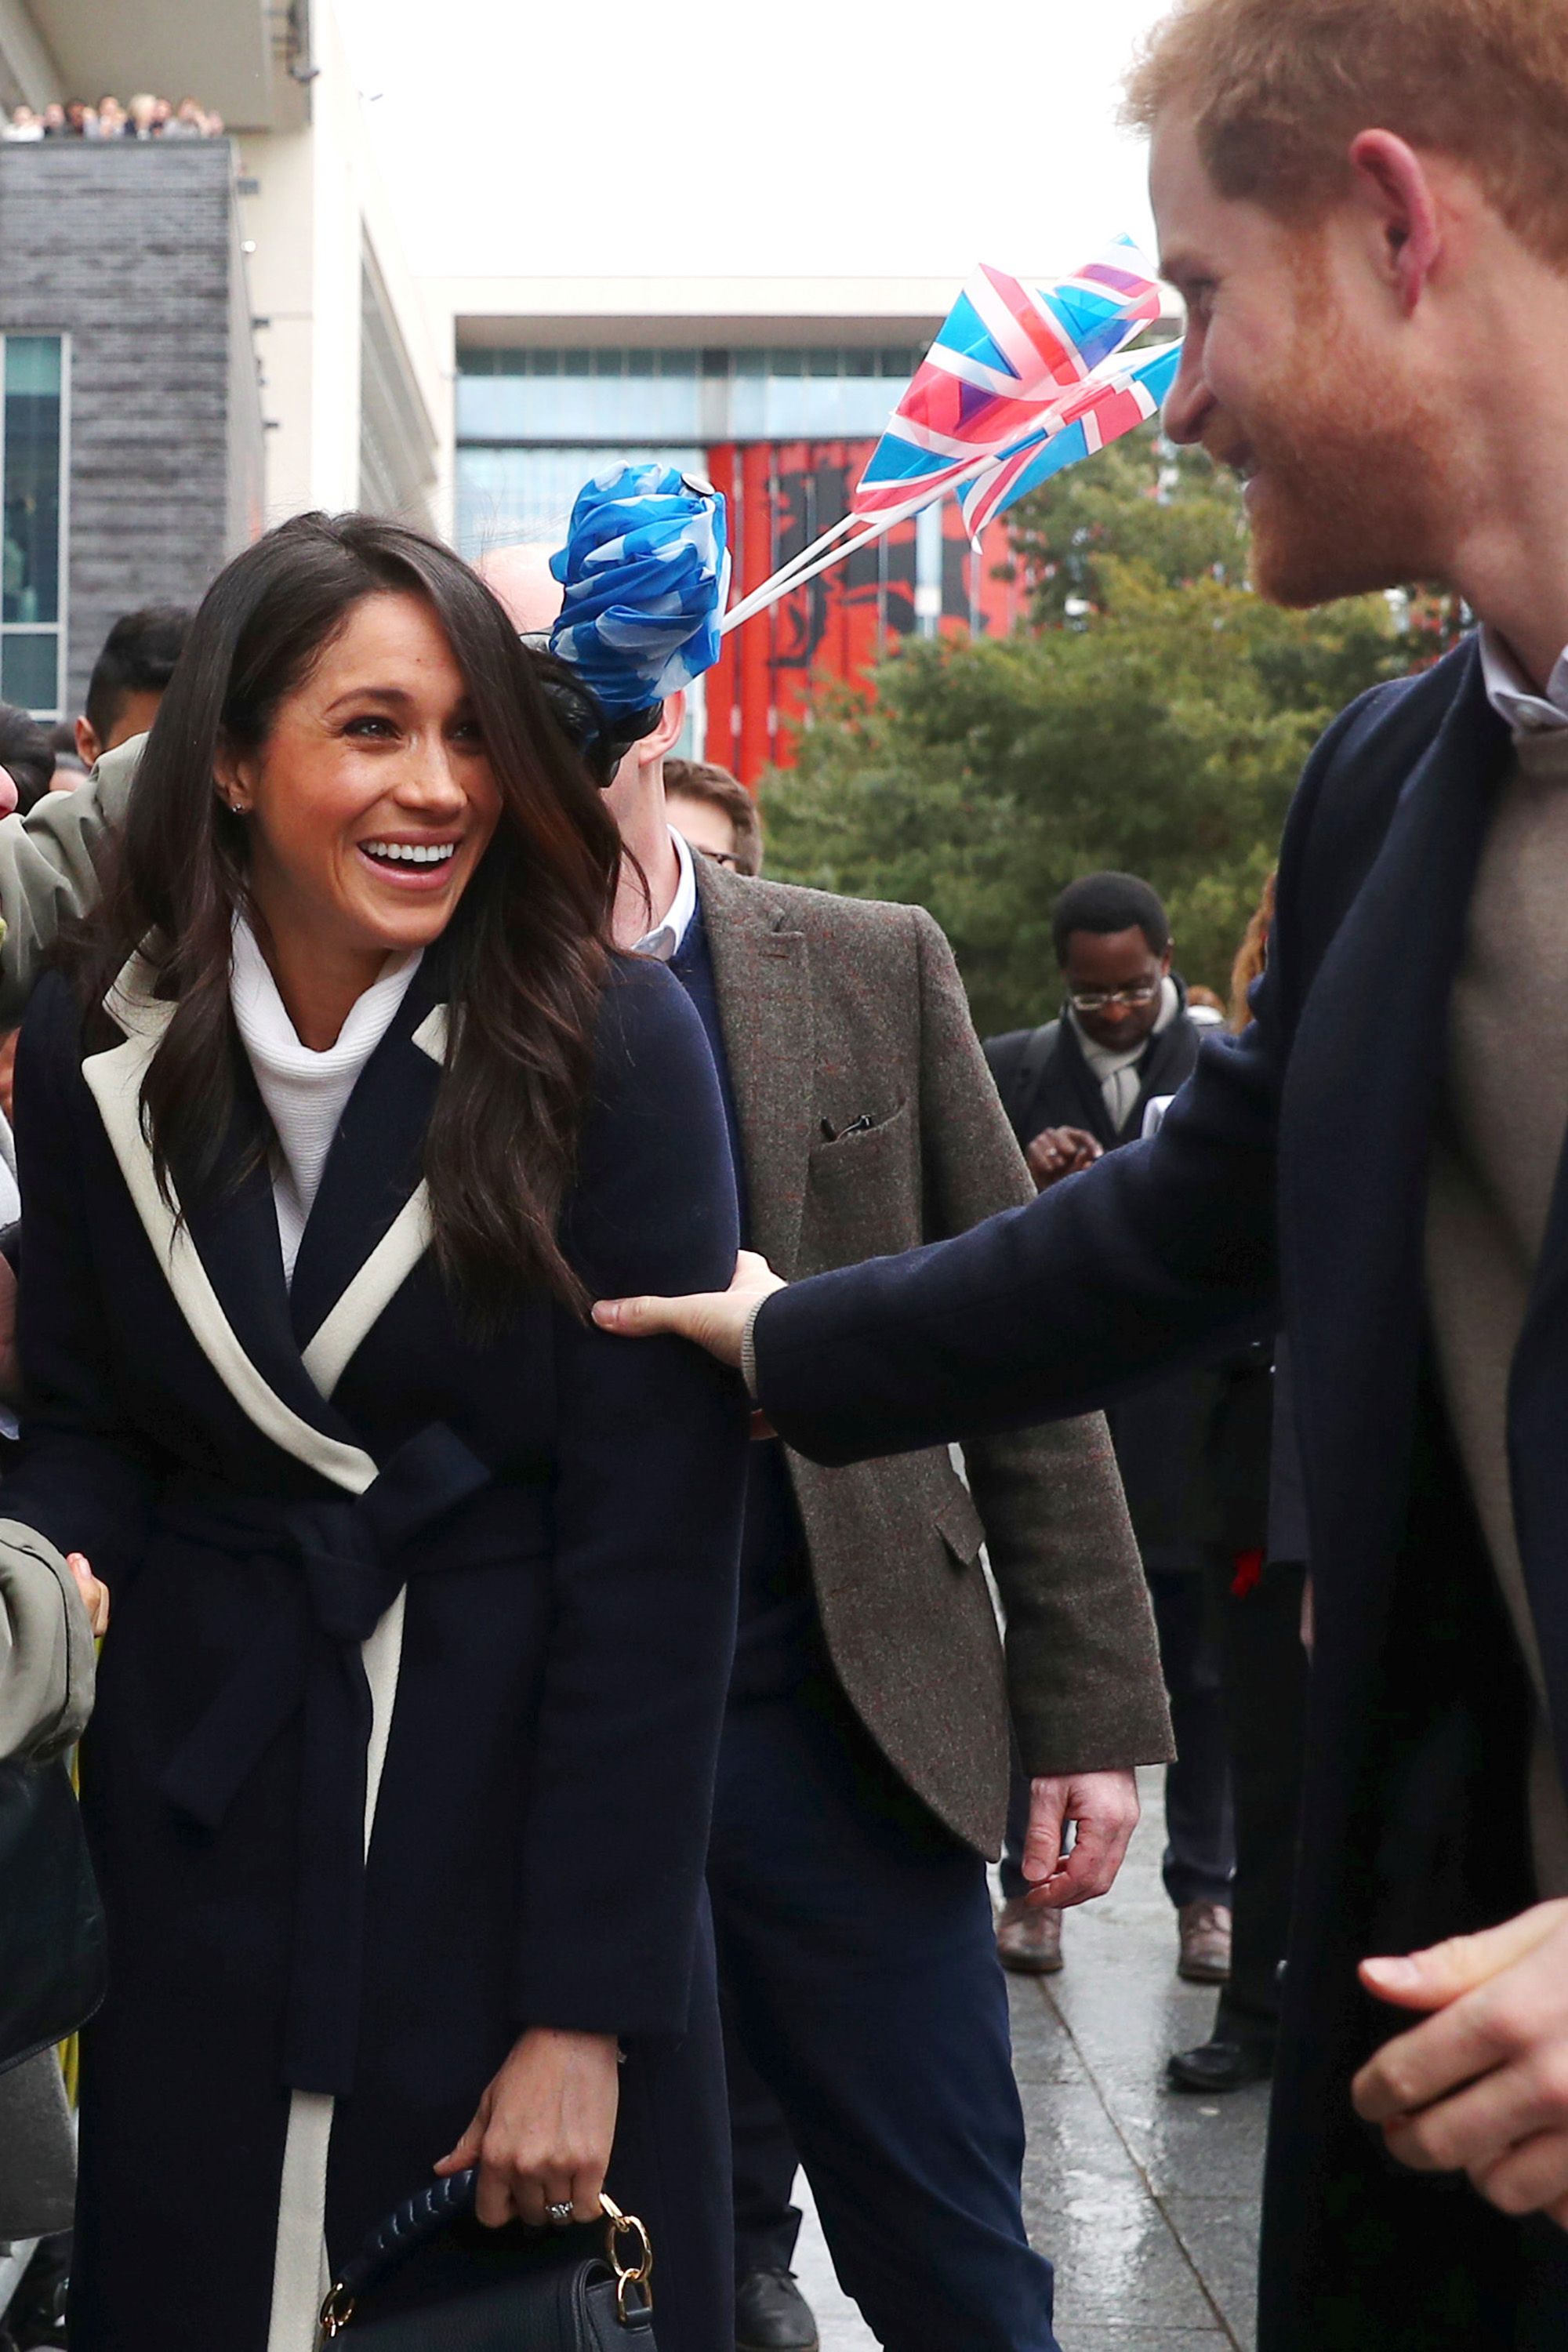 https://hips.hearstapps.com/hmg-prod.s3.amazonaws.com/images/hbz-prince-harry-meghan-markle-cute-moments-gettyimages-929177444-1523378908.jpg?crop=1xw:1xh;center,top